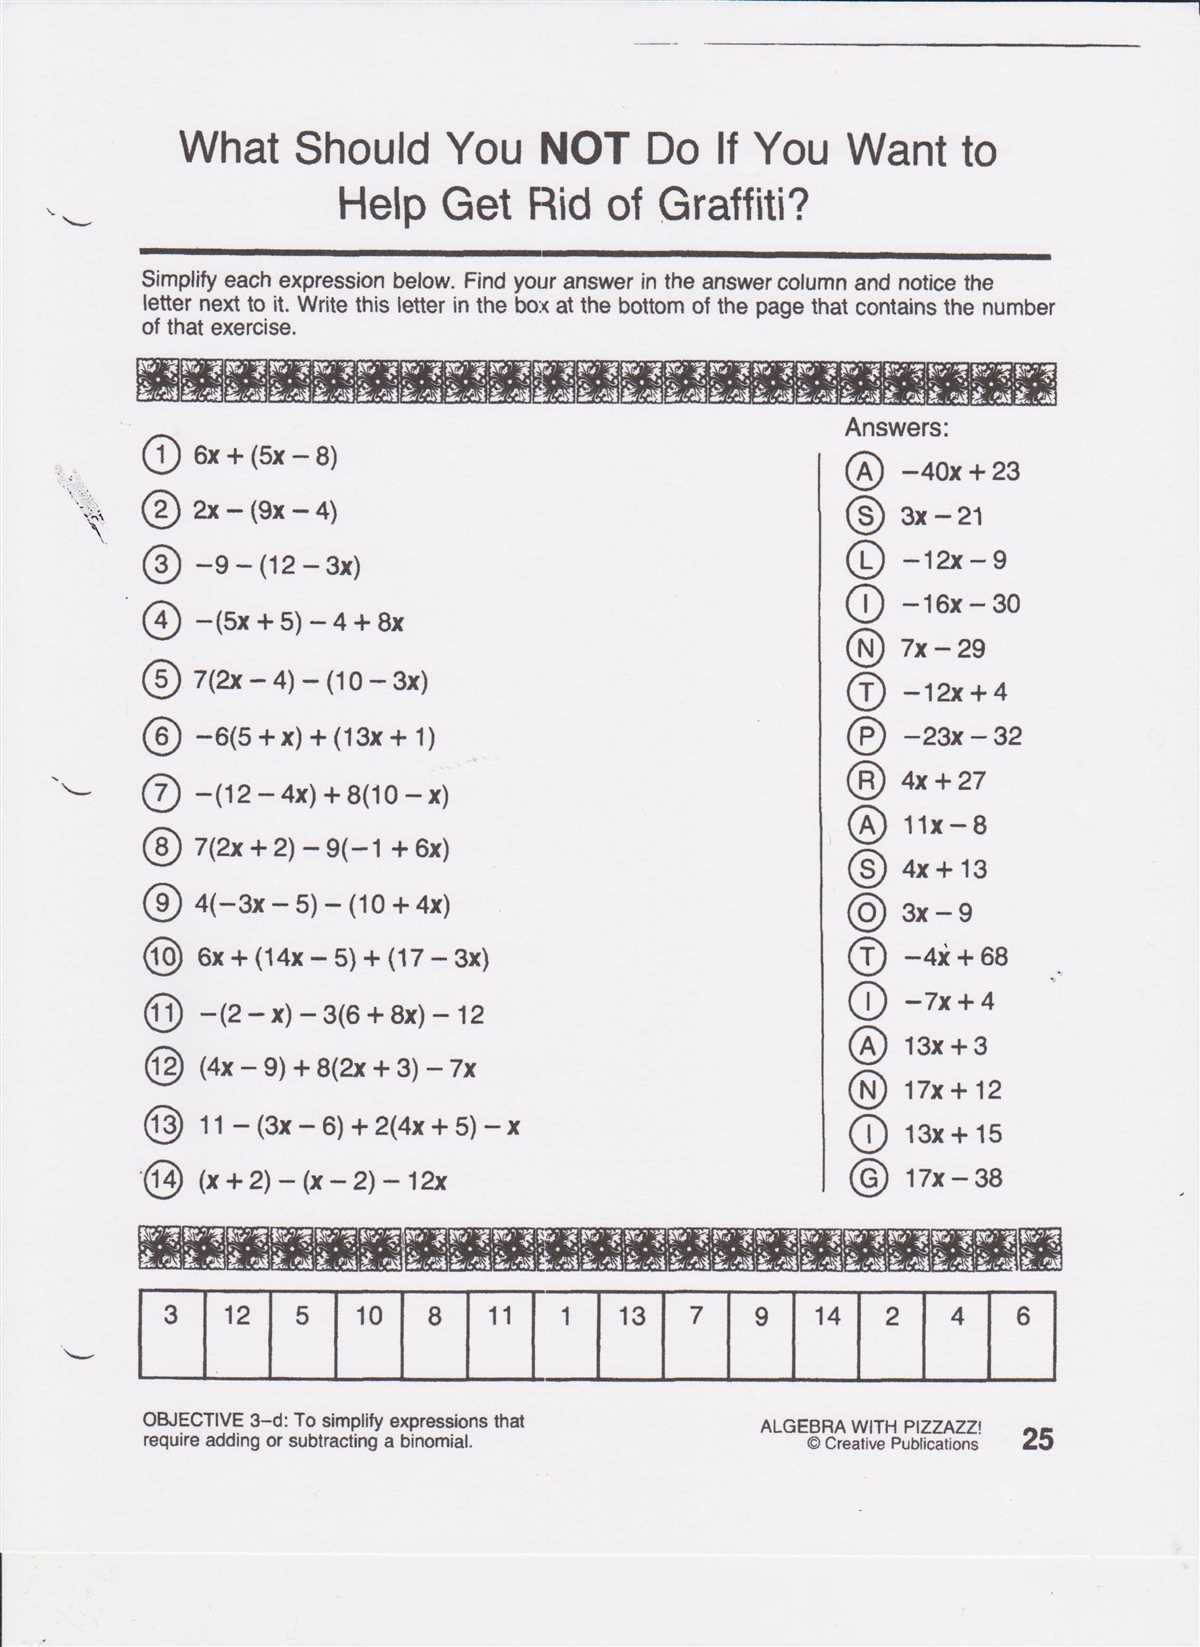 Analyzing the Problem-Solving Strategies in Algebra with Pizzazz Answer Page 150